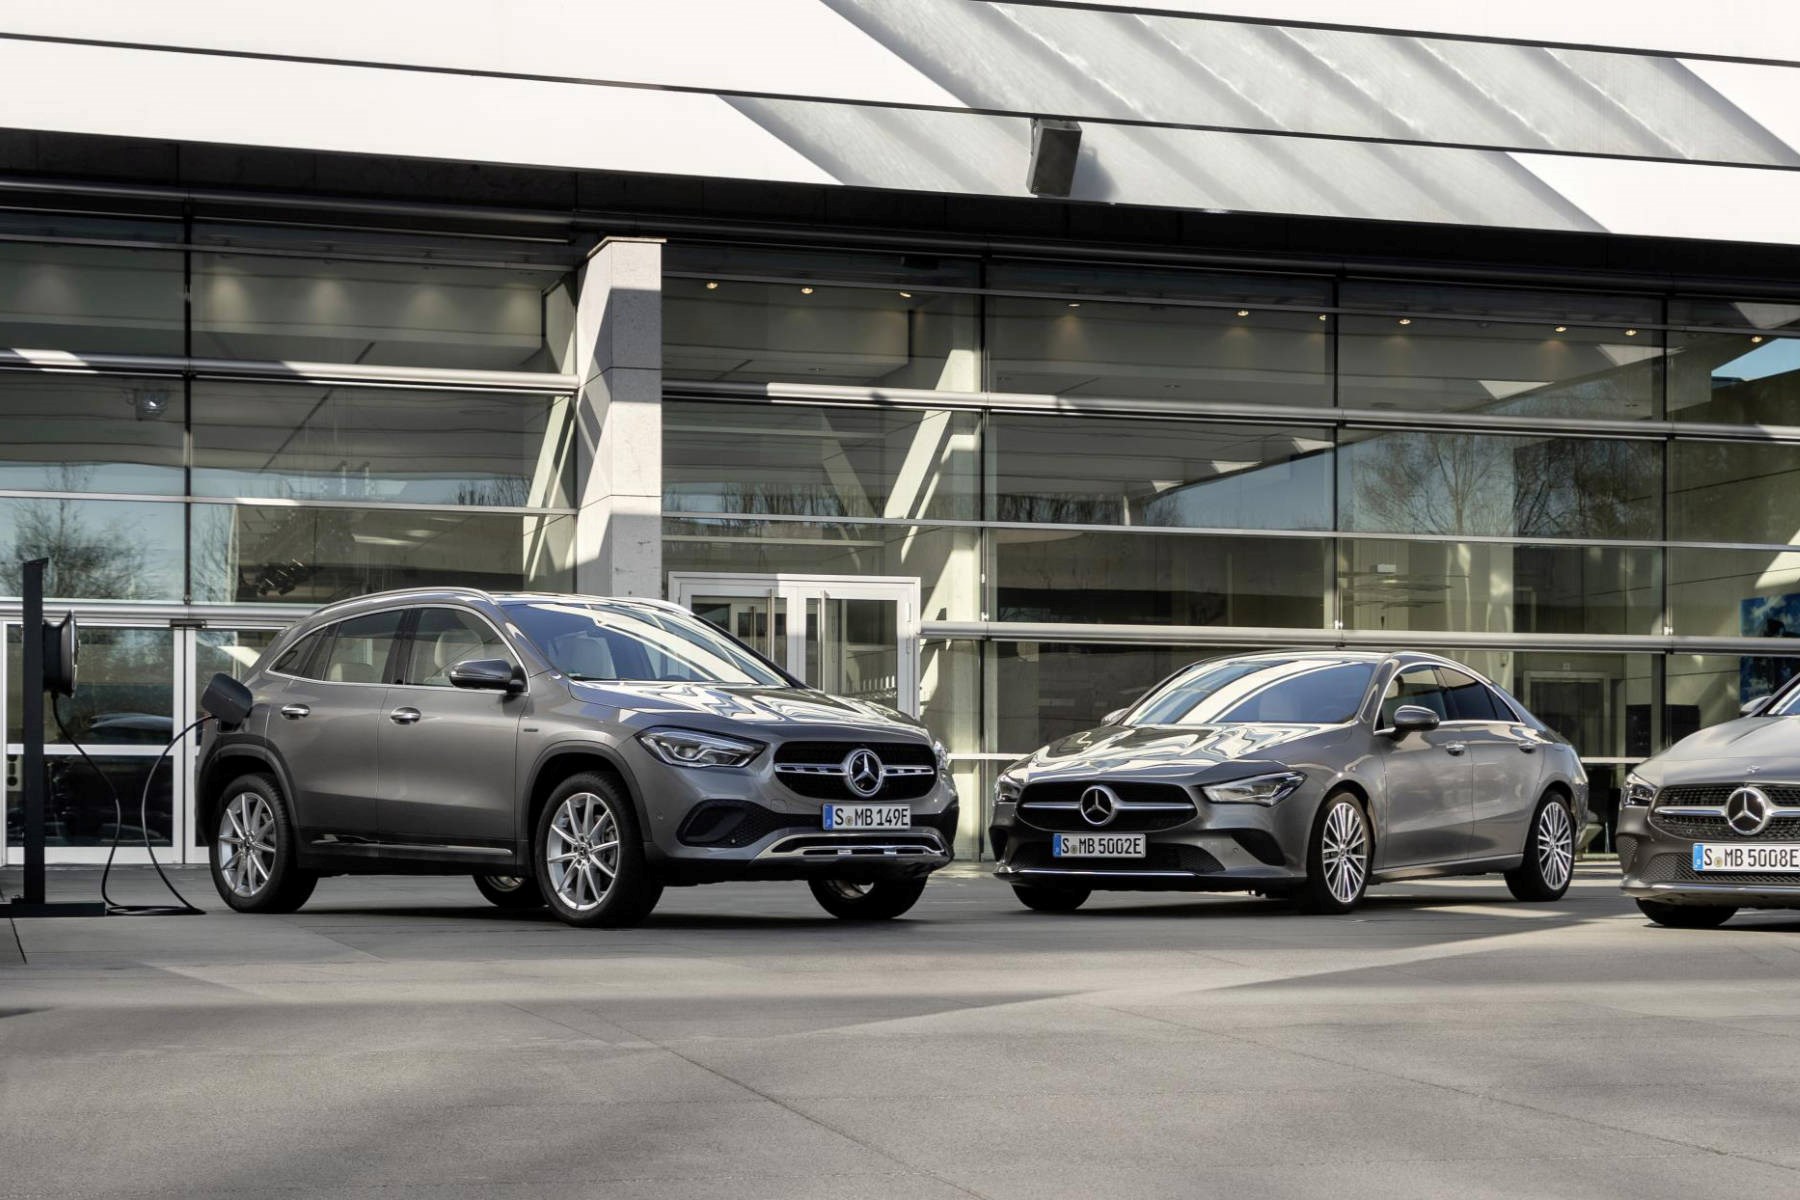 Mercedes hybrid cars: all you need to know